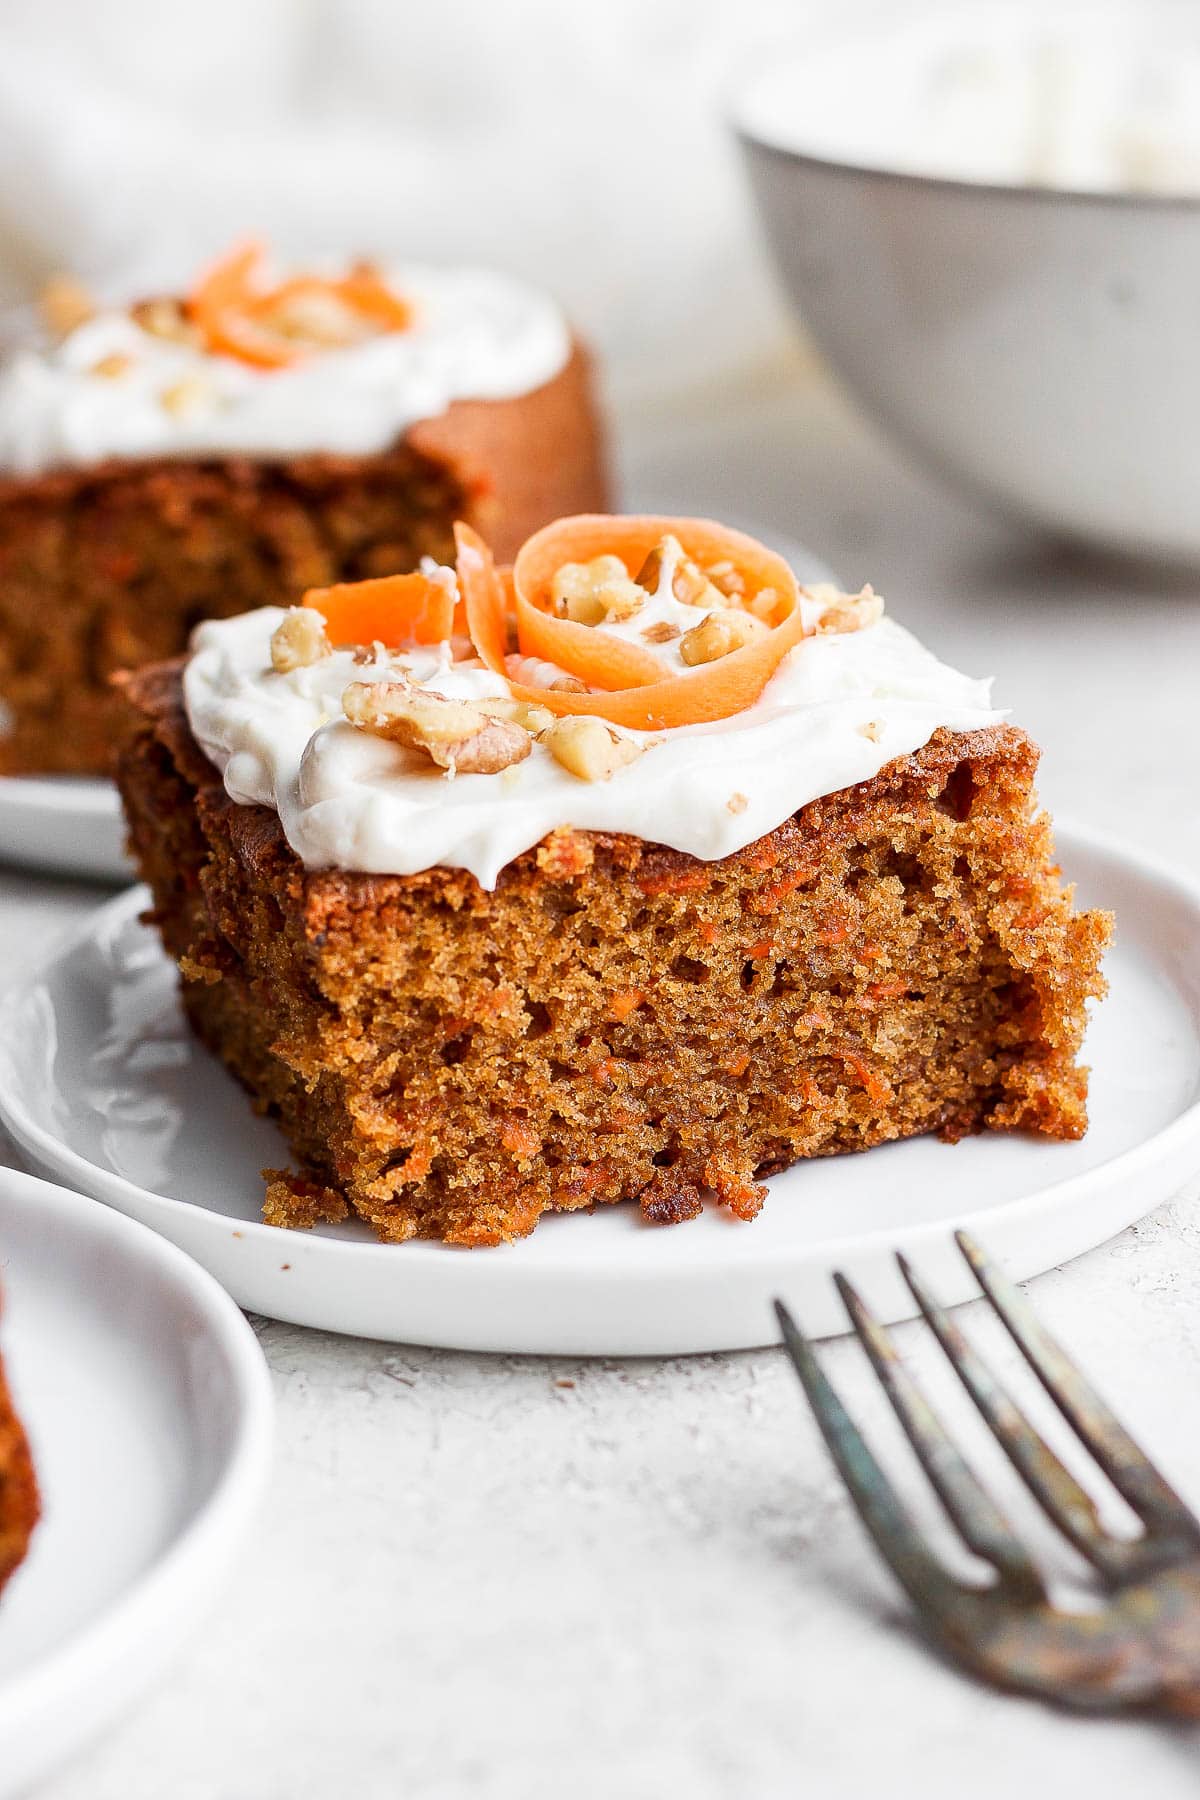 Plate with a slice of gluten free carrot cake with cream cheese frosting.